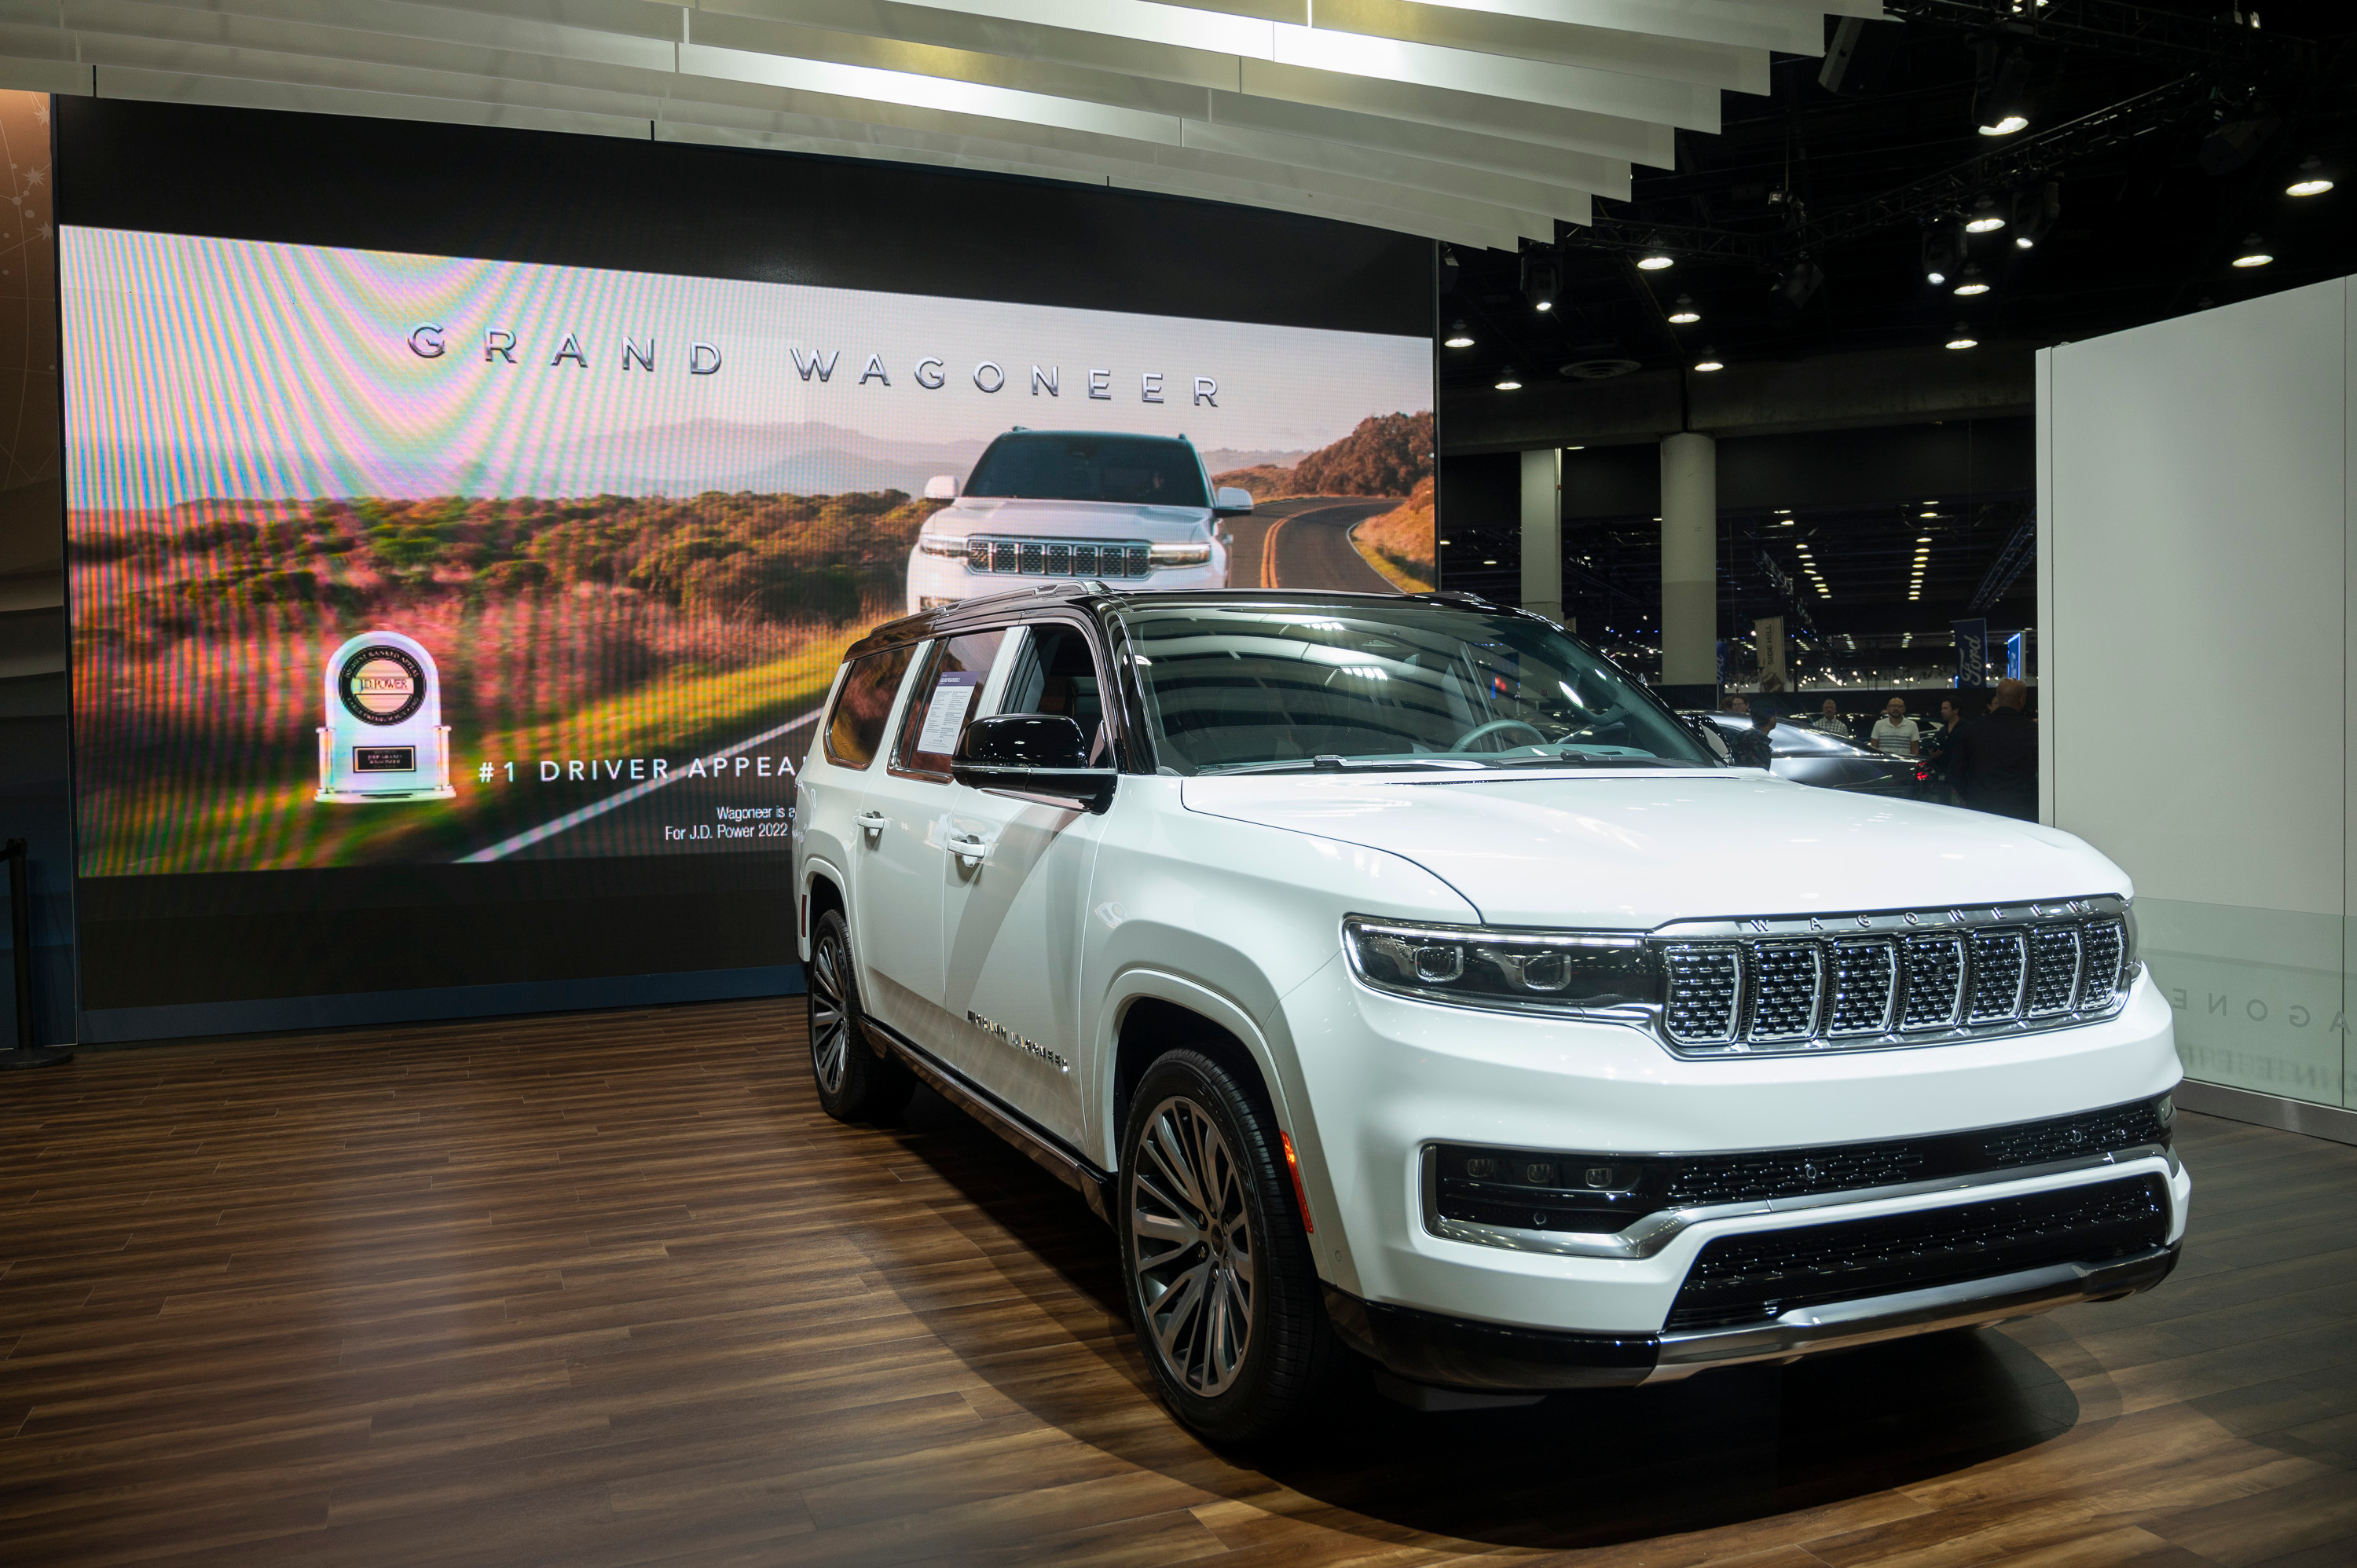 The Jeep Grand Wagoneer on display during the 2022 North American International Auto Show at Huntington Place in Detroit on Wednesday, Sept. 14 2022.